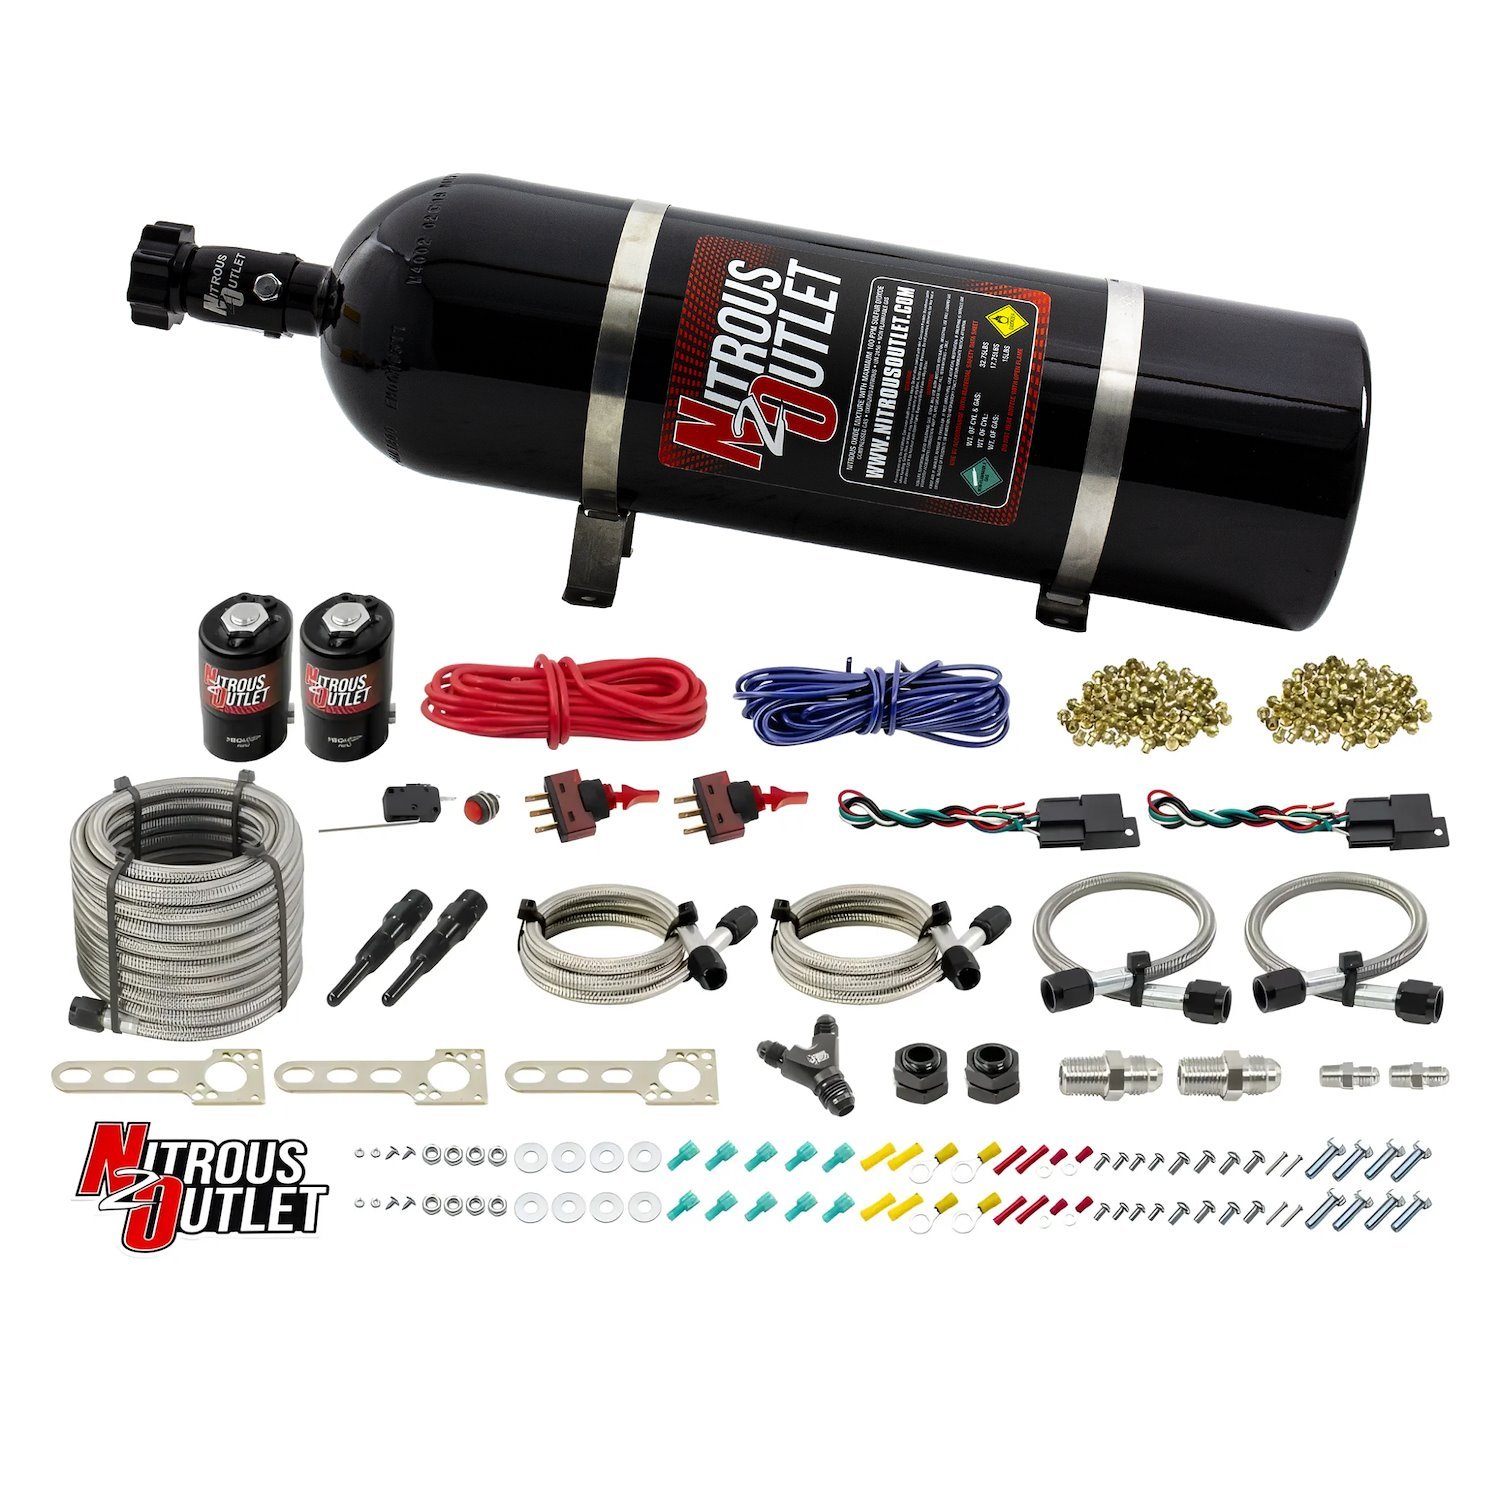 00-10207-15 Universal EFI Dual-Stage Dry Single-Nozzle System, 35-200HP, 15lb Bottle